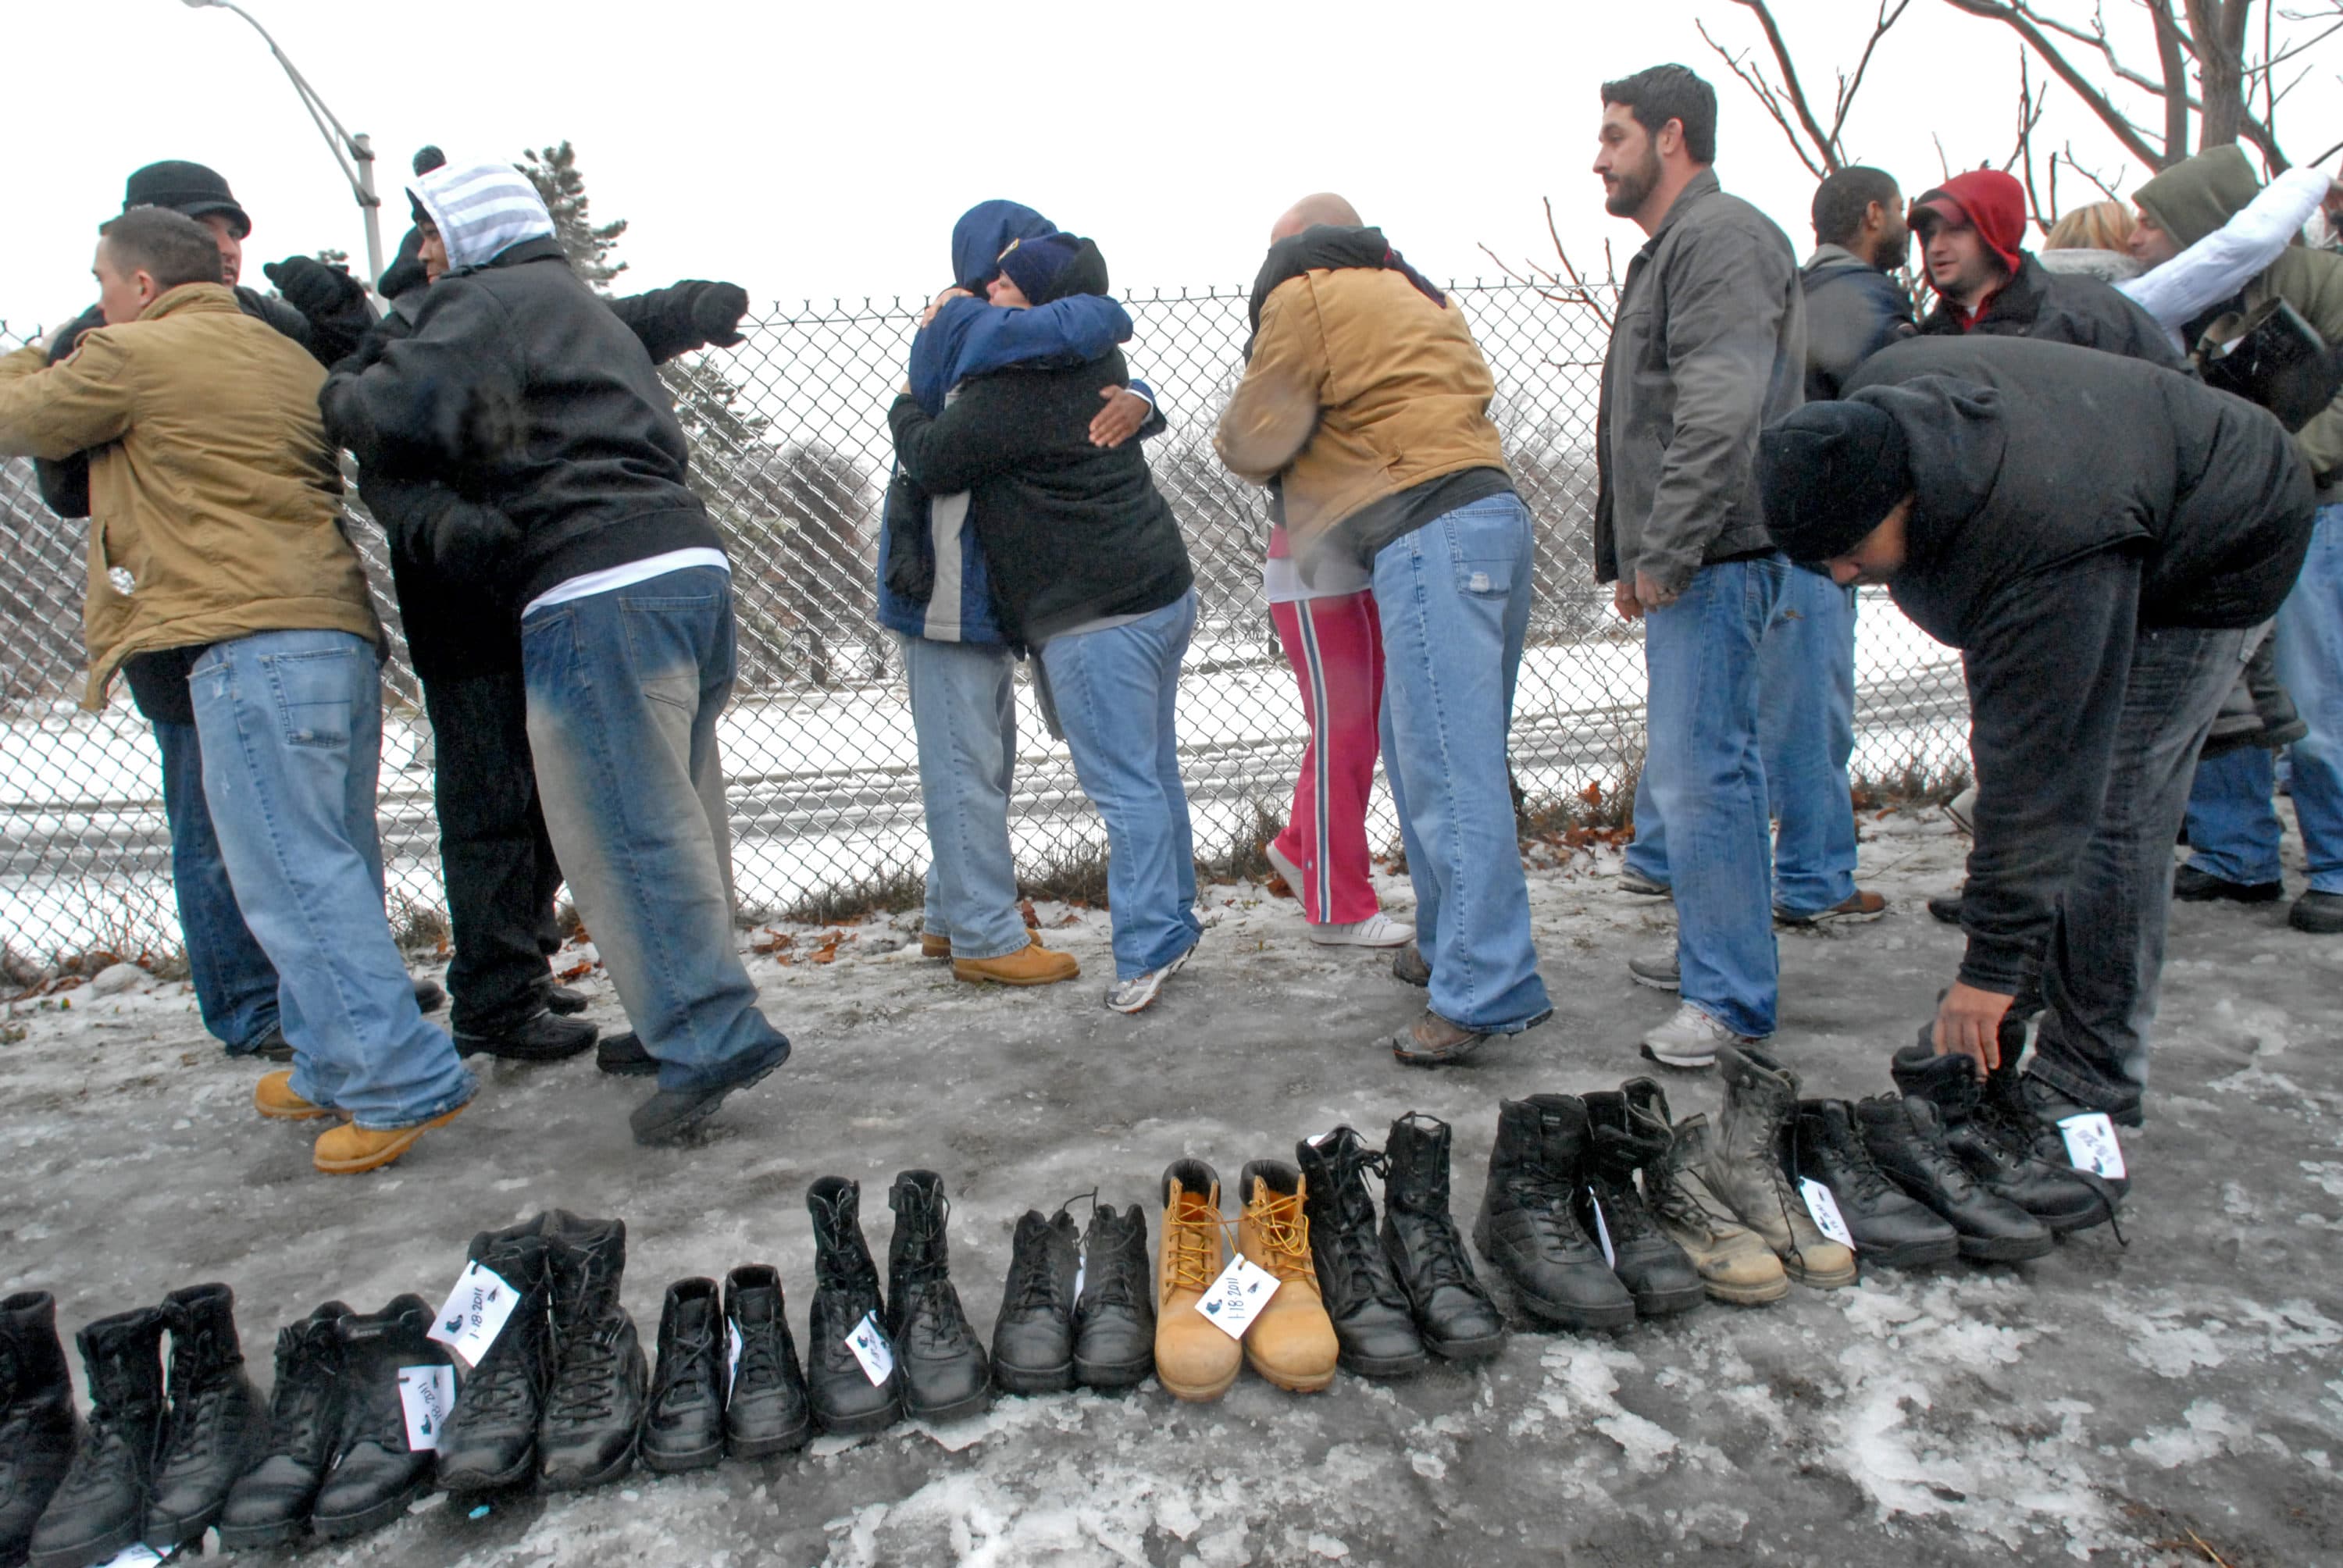 On January 18, 2011, Camden police officers embraced and placed their boots along an icy sidewalk after nearly half of them were laid off. (Photo by April Saul)